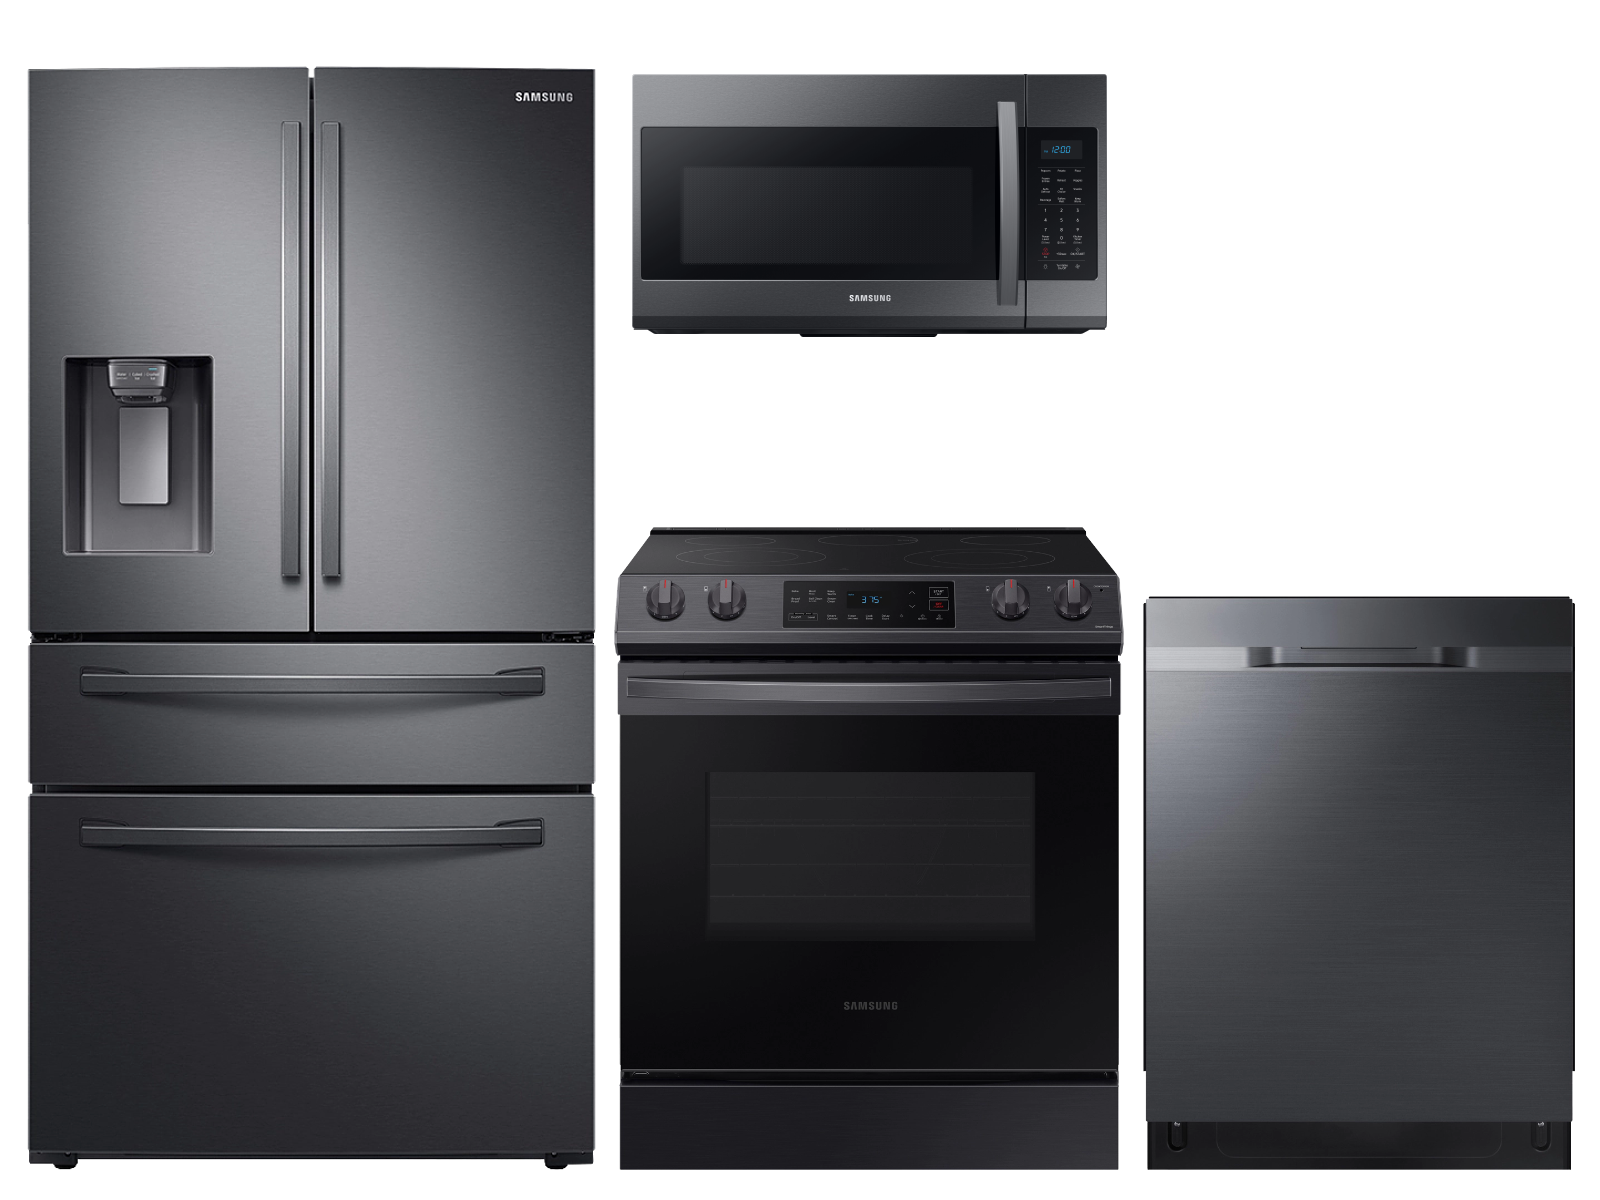 28 cu. ft. 4-door refrigerator, 6.3 cu. ft. electric range, microwave and 48 dBA dishwasher package